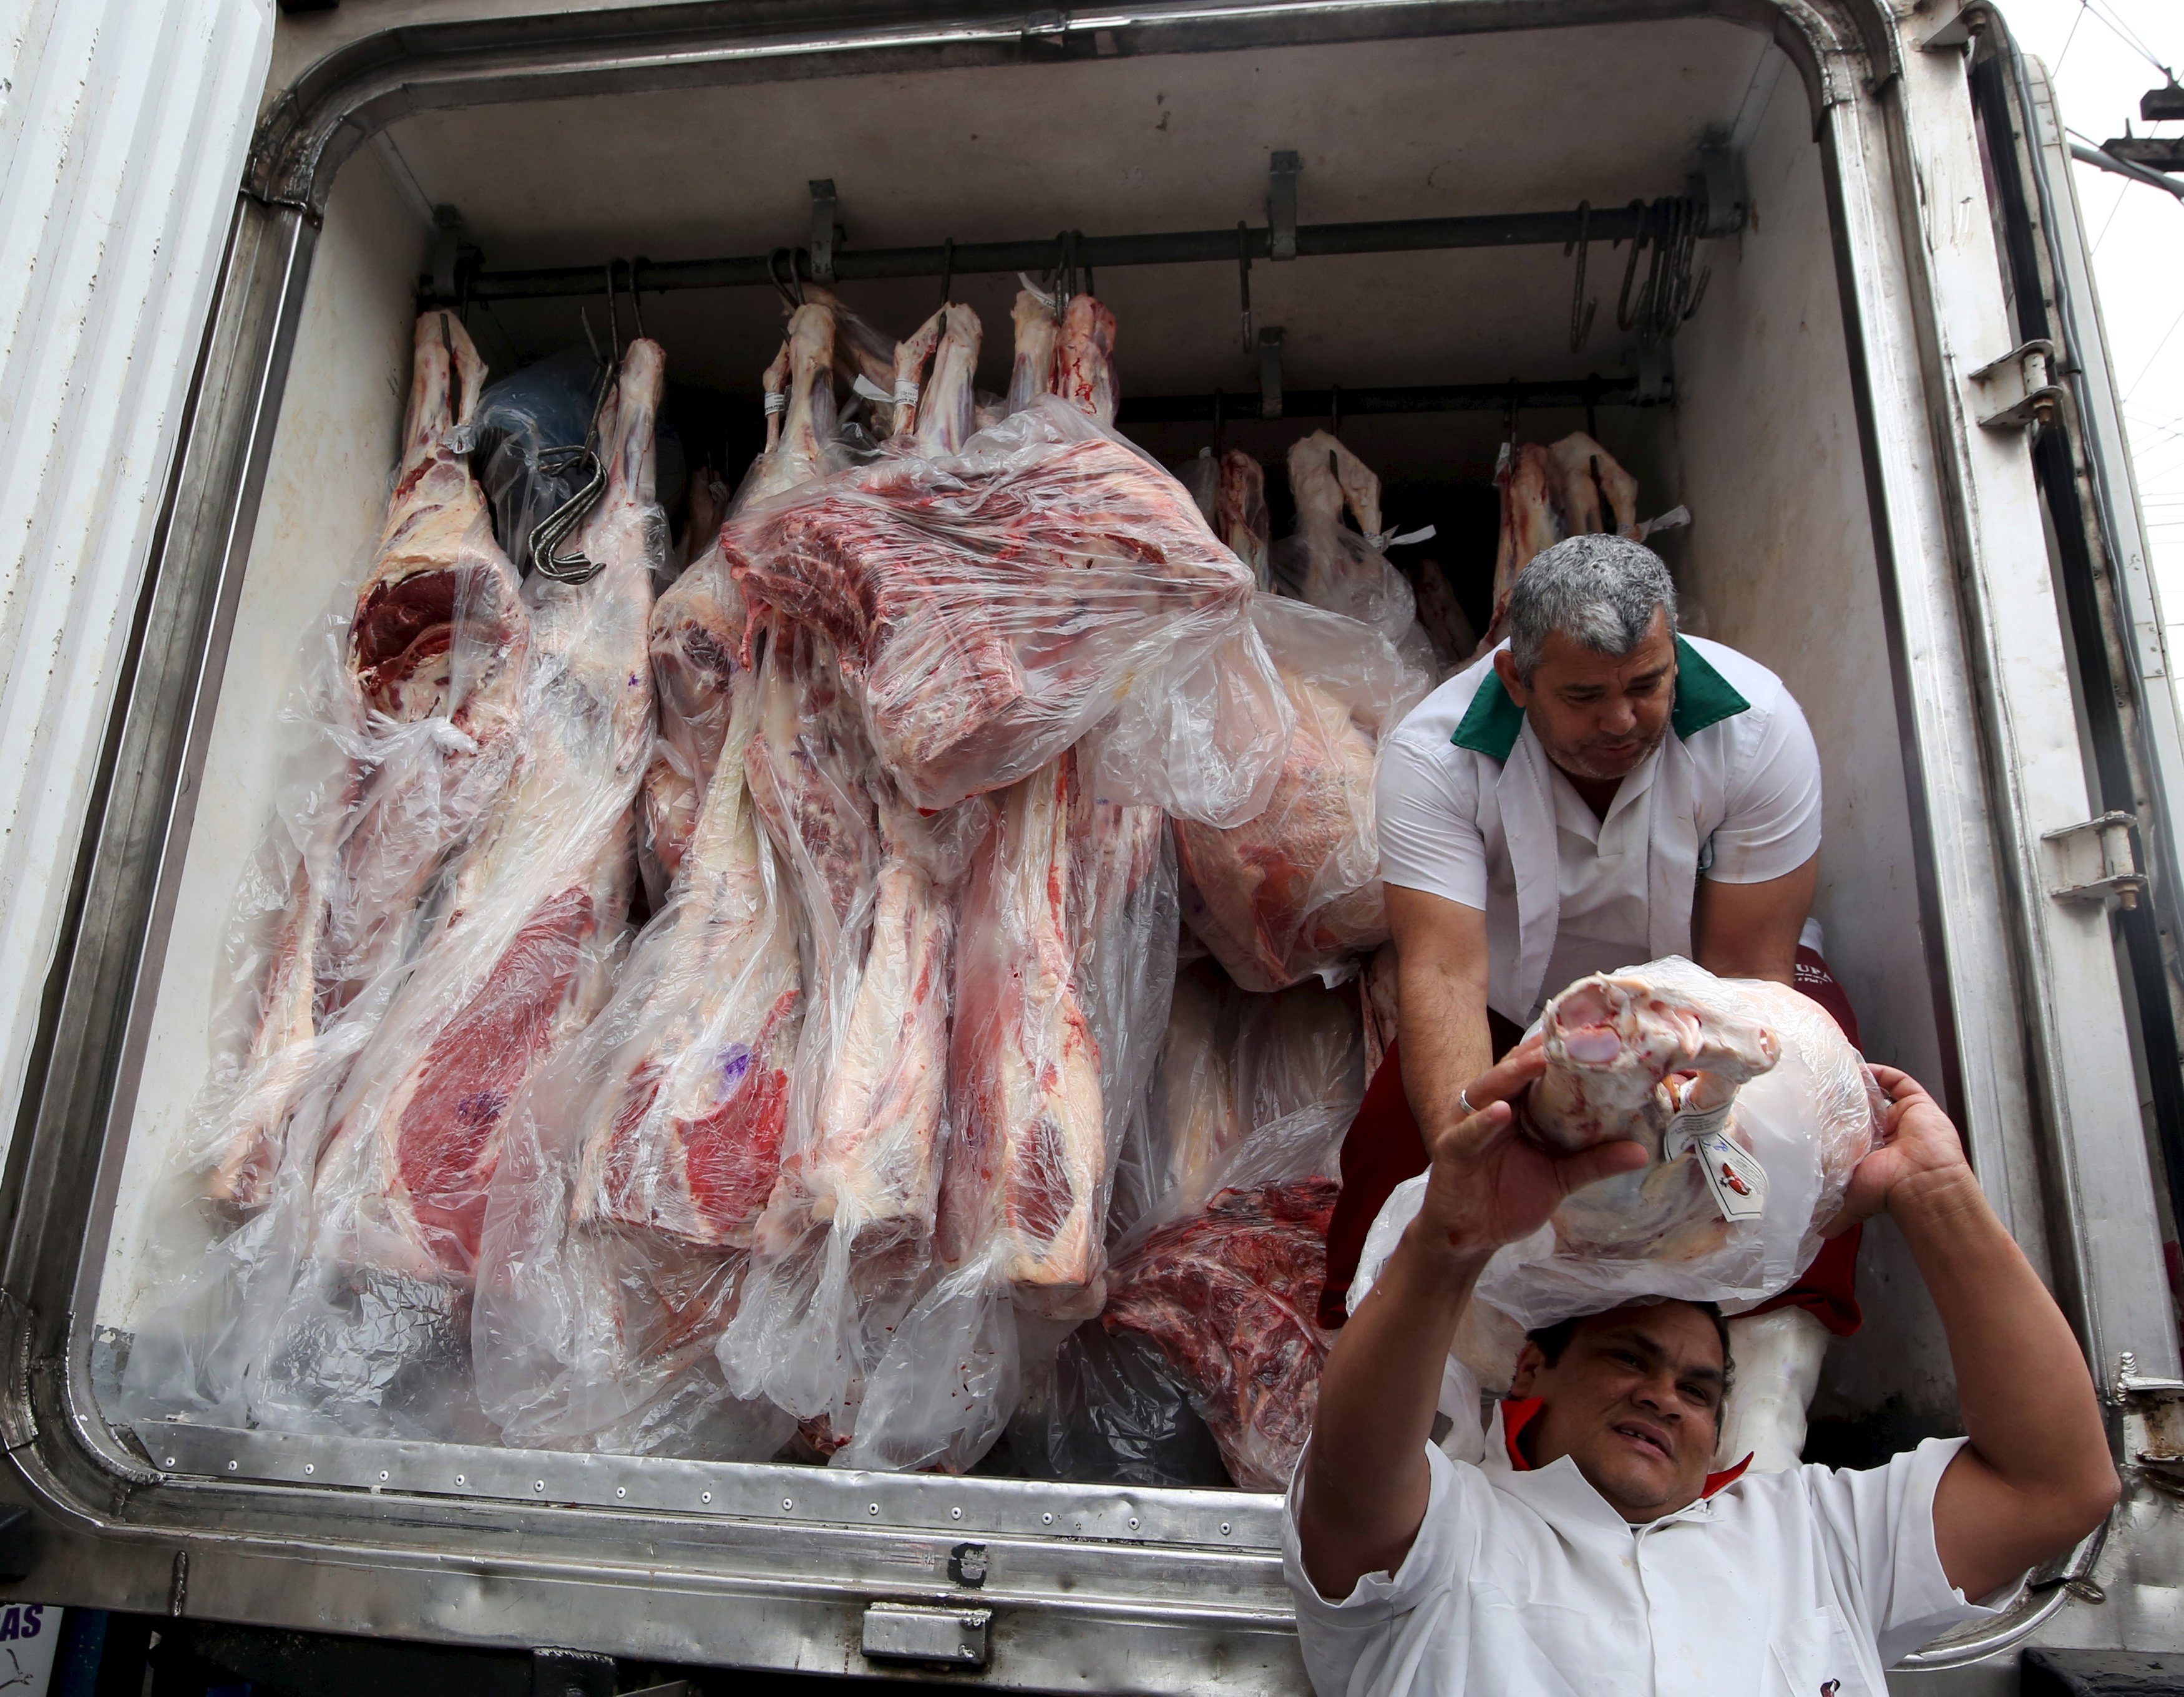 Workers unload packed meat from a truck in Sao Paulo. Photo: Reuters